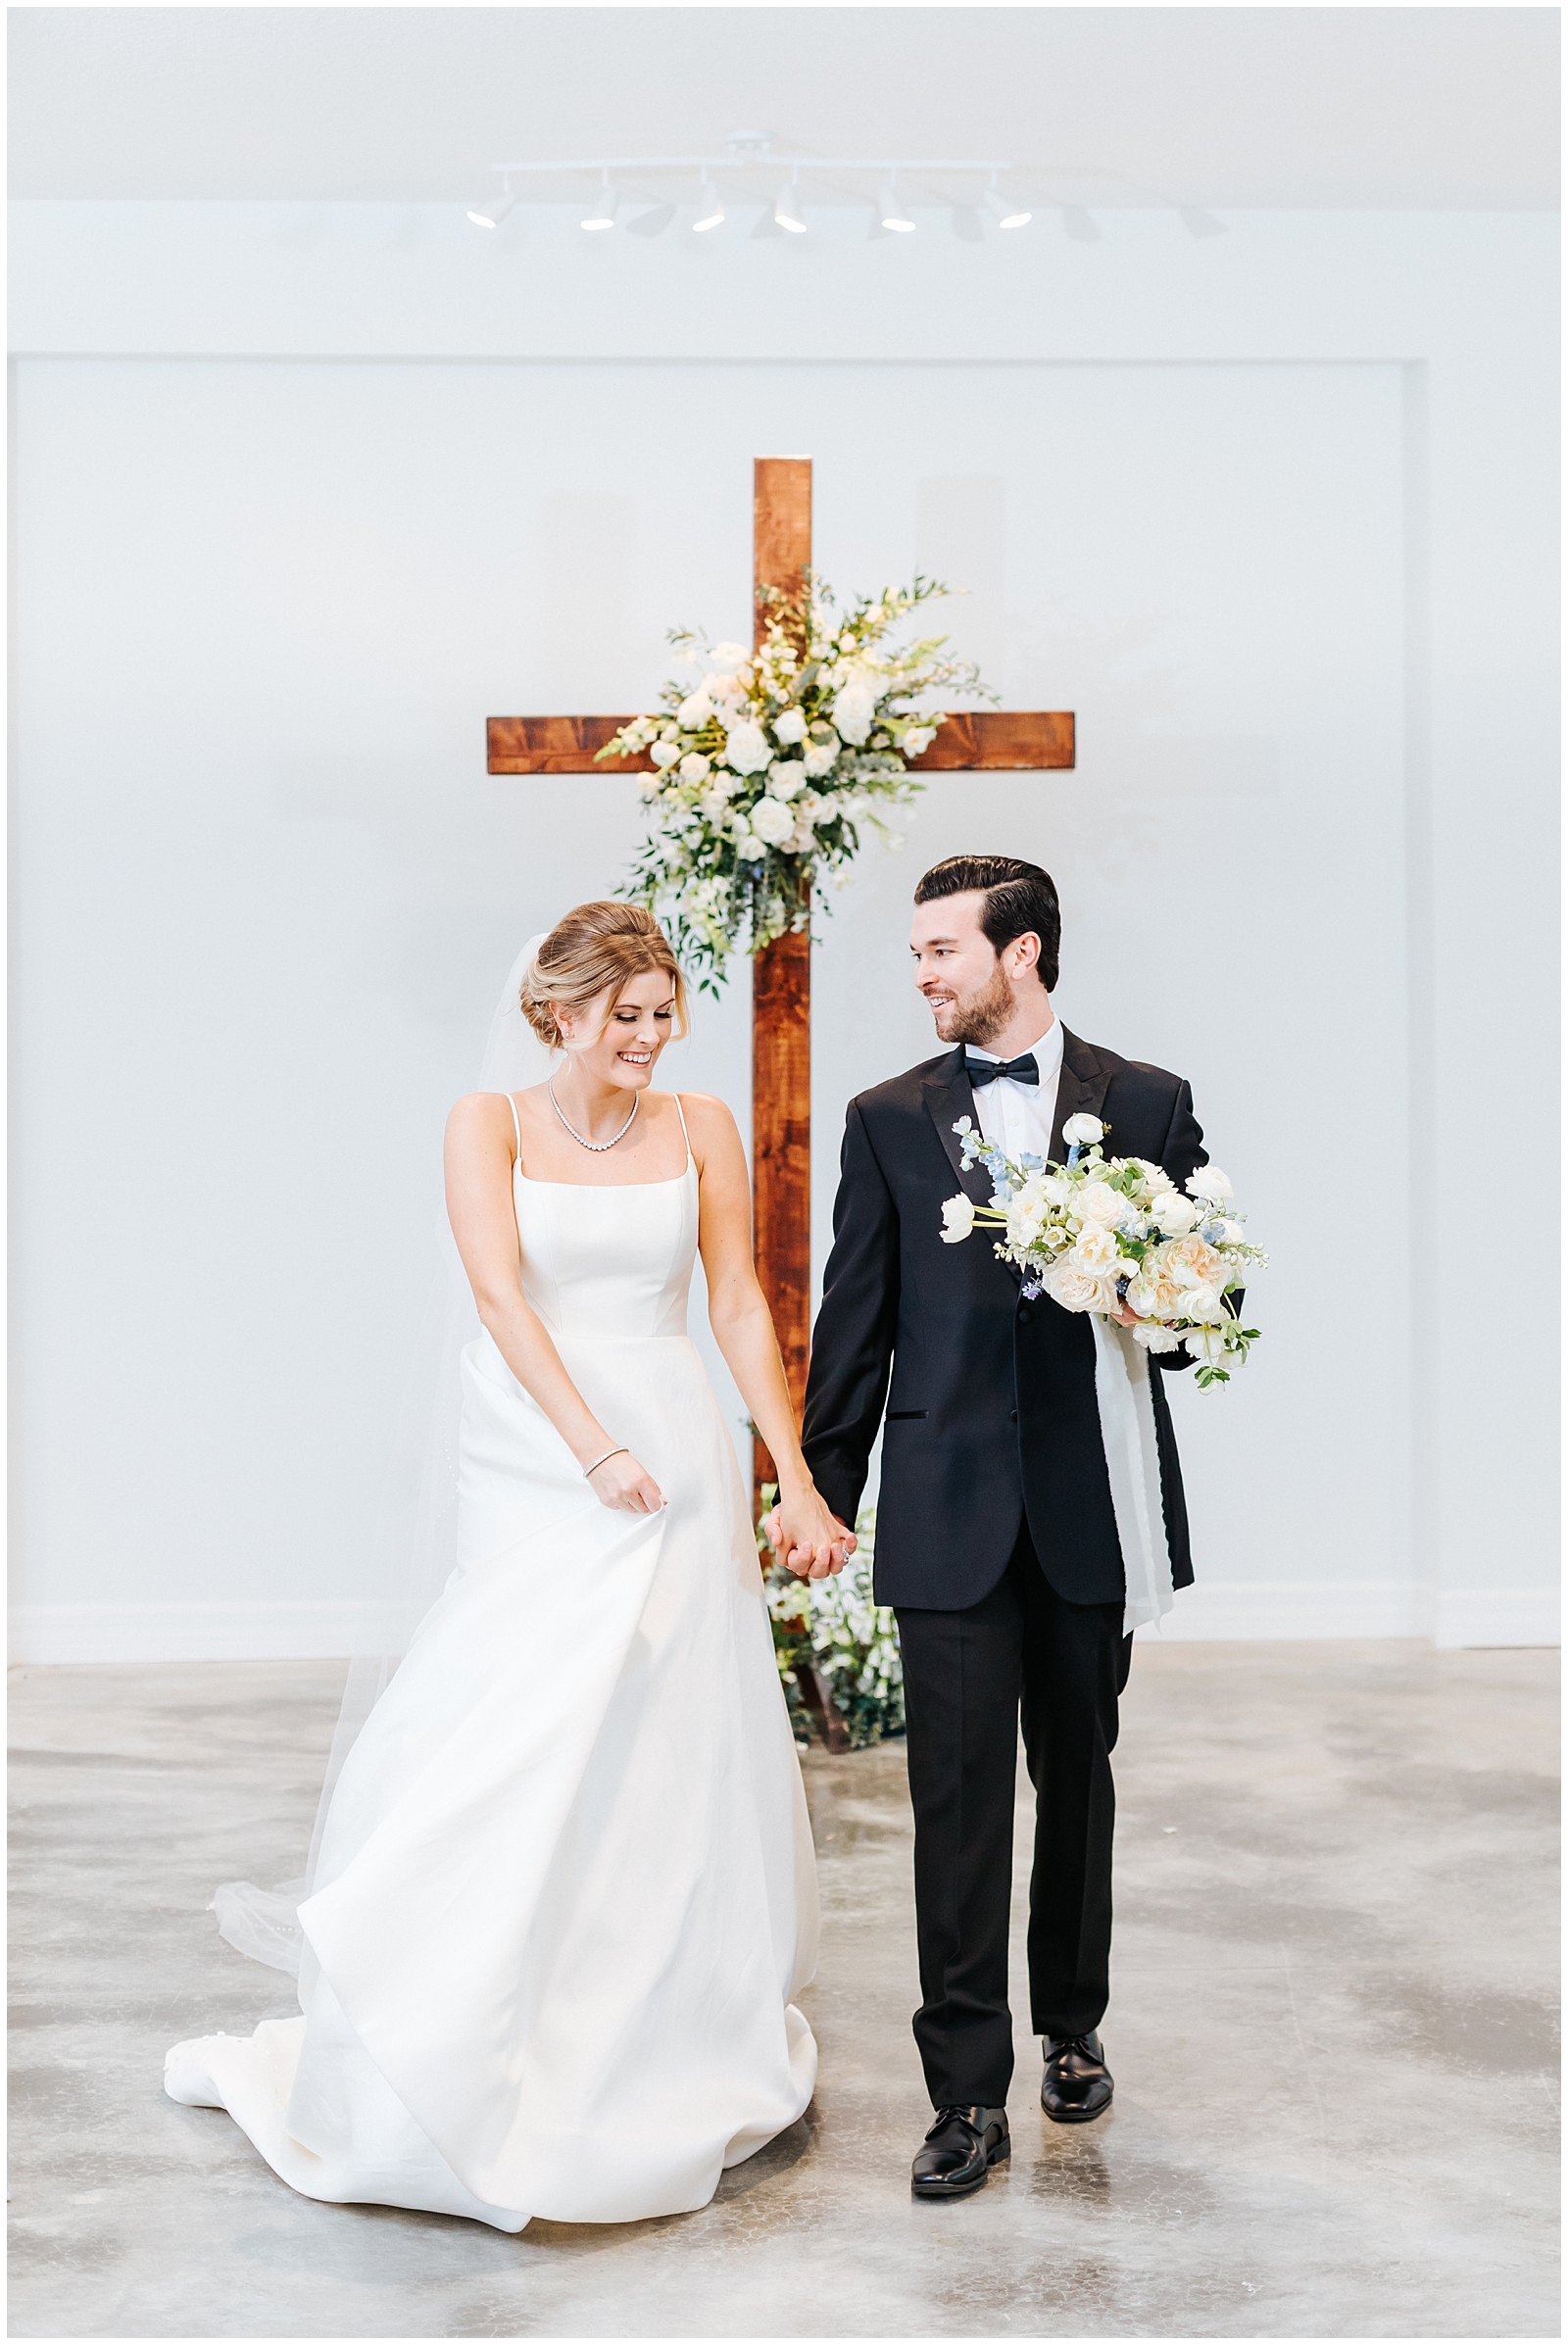 Bride and Groom Walking hand in hand at Classic Elegant Florida Wedding